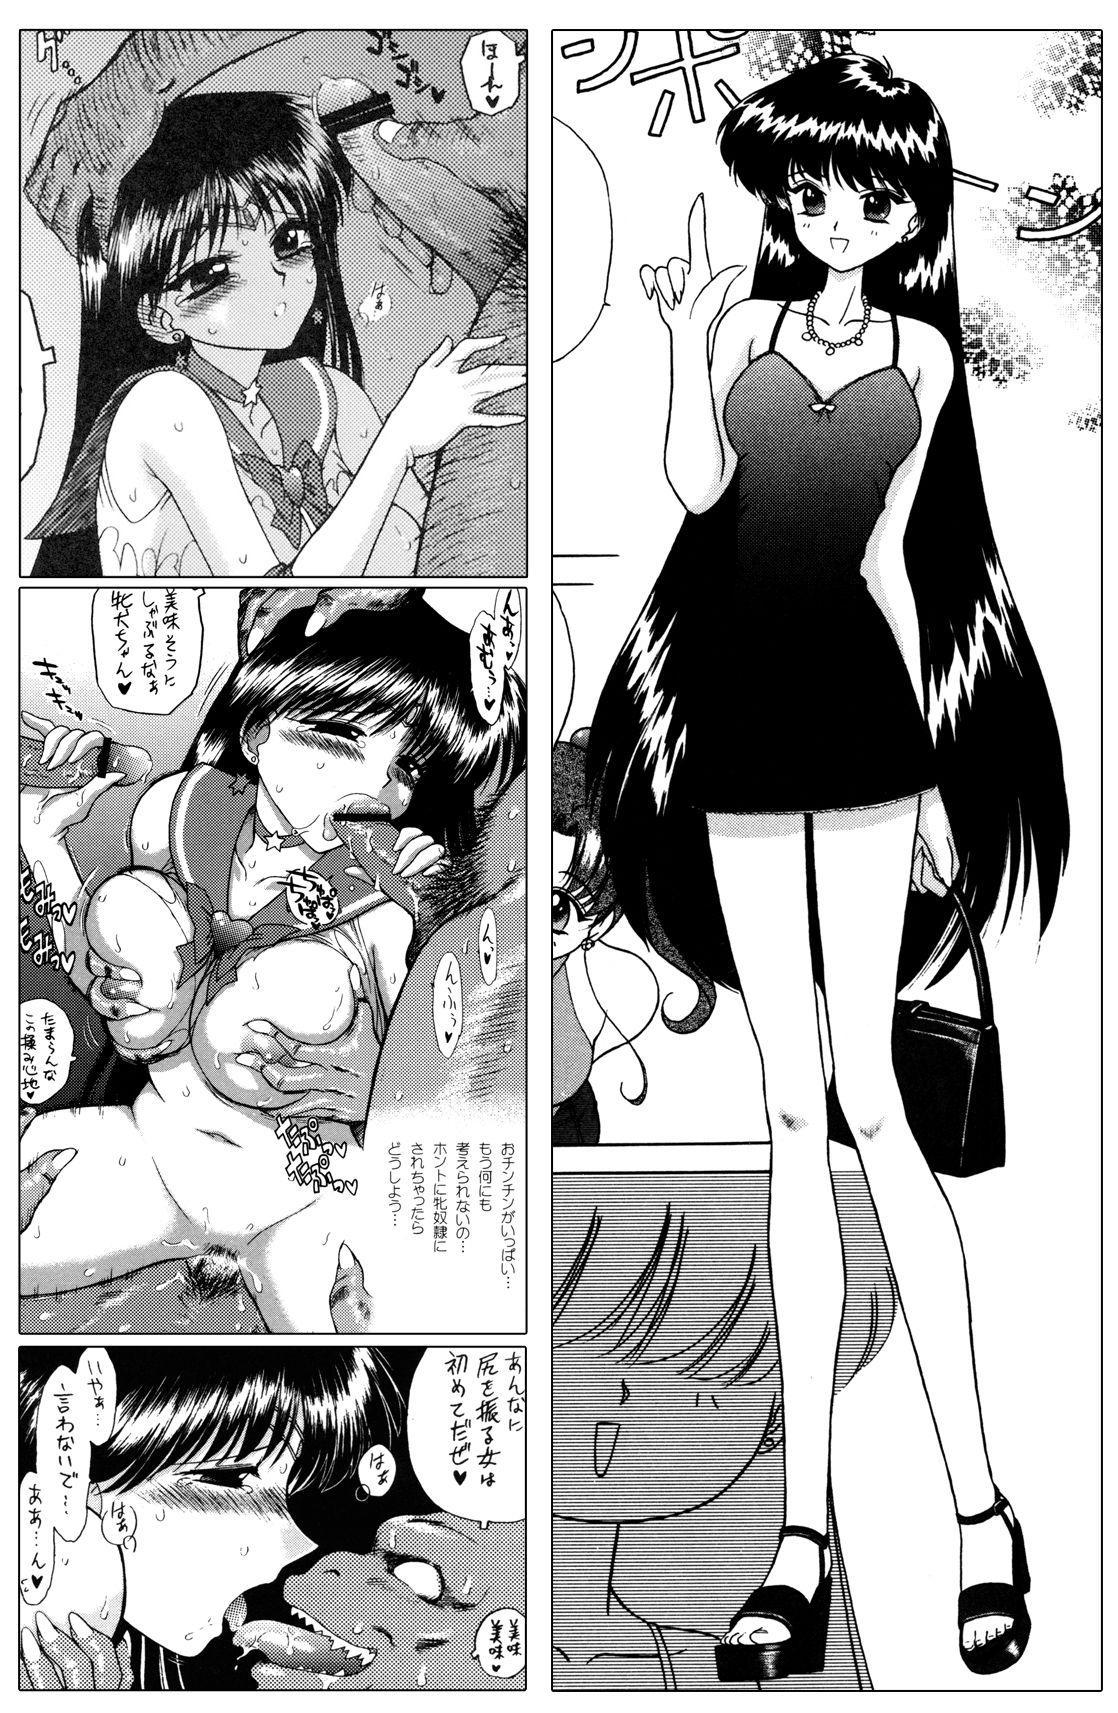 Petite Girl Porn QUEEN OF SPADES - 黑桃皇后 - Sailor moon Tattooed - Page 12